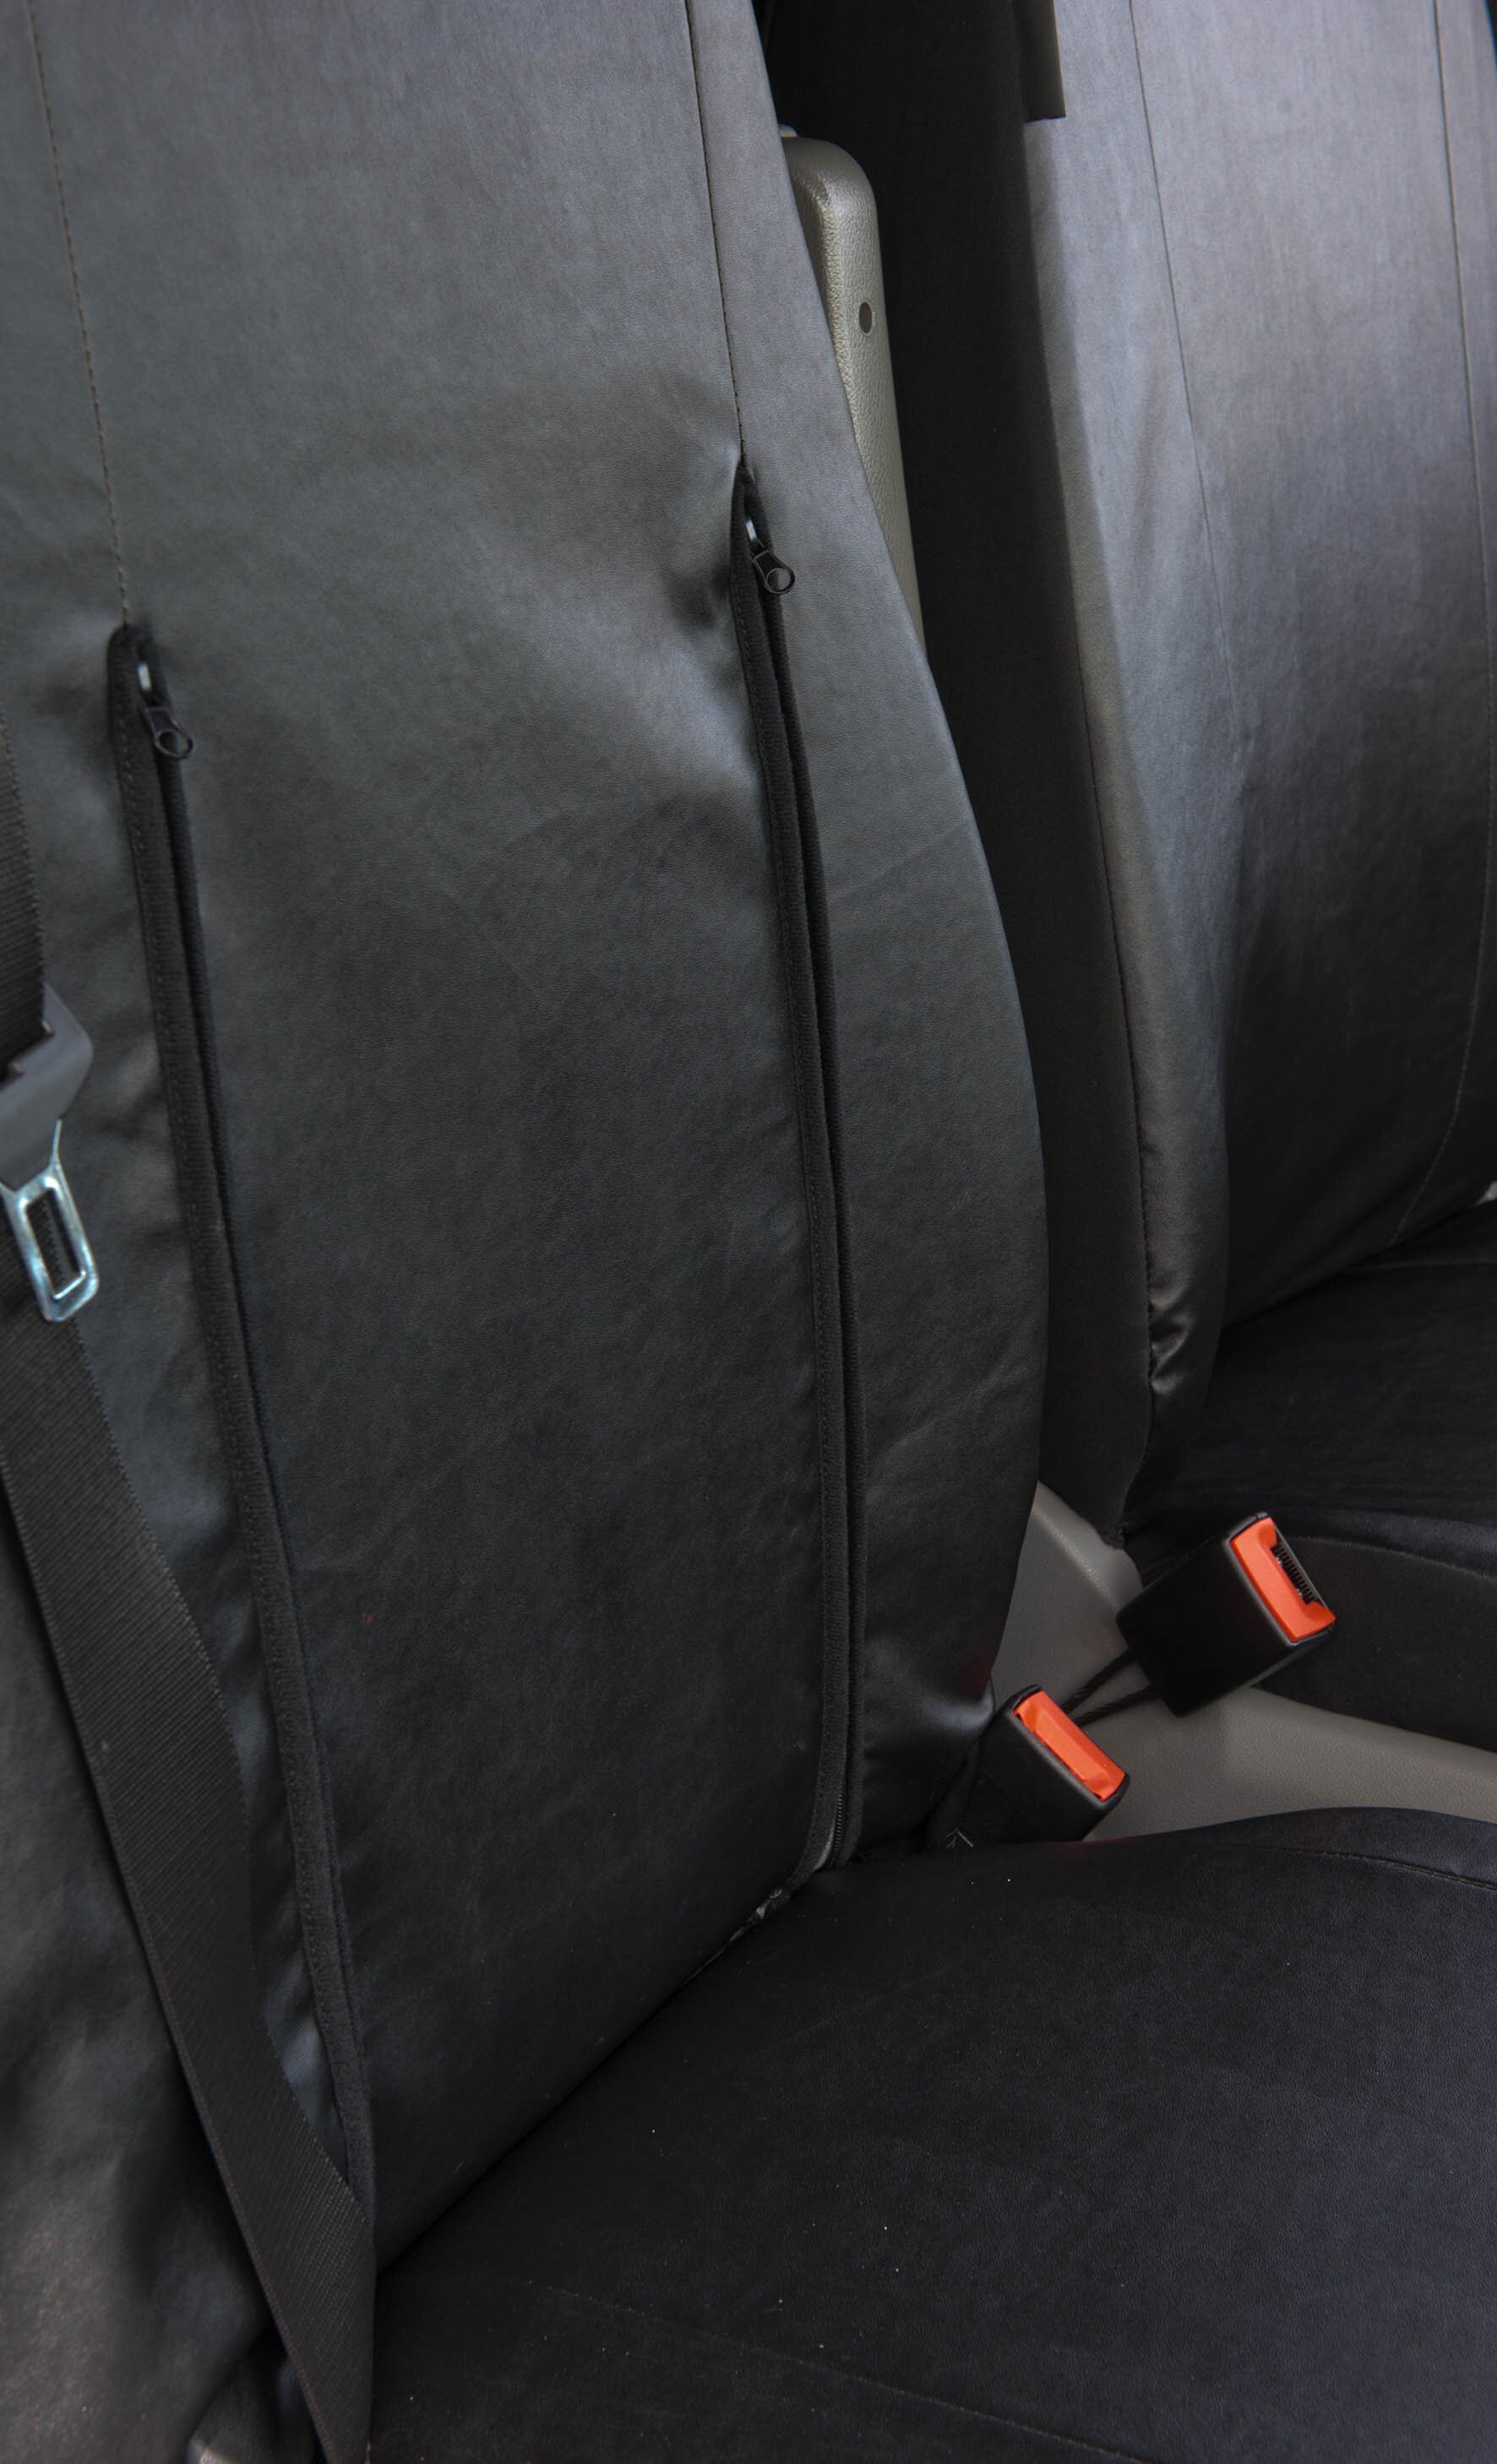 Seat cover made of imitation leather for VW Crafter, Mercedes Sprinter, single seat cover, double seat cover